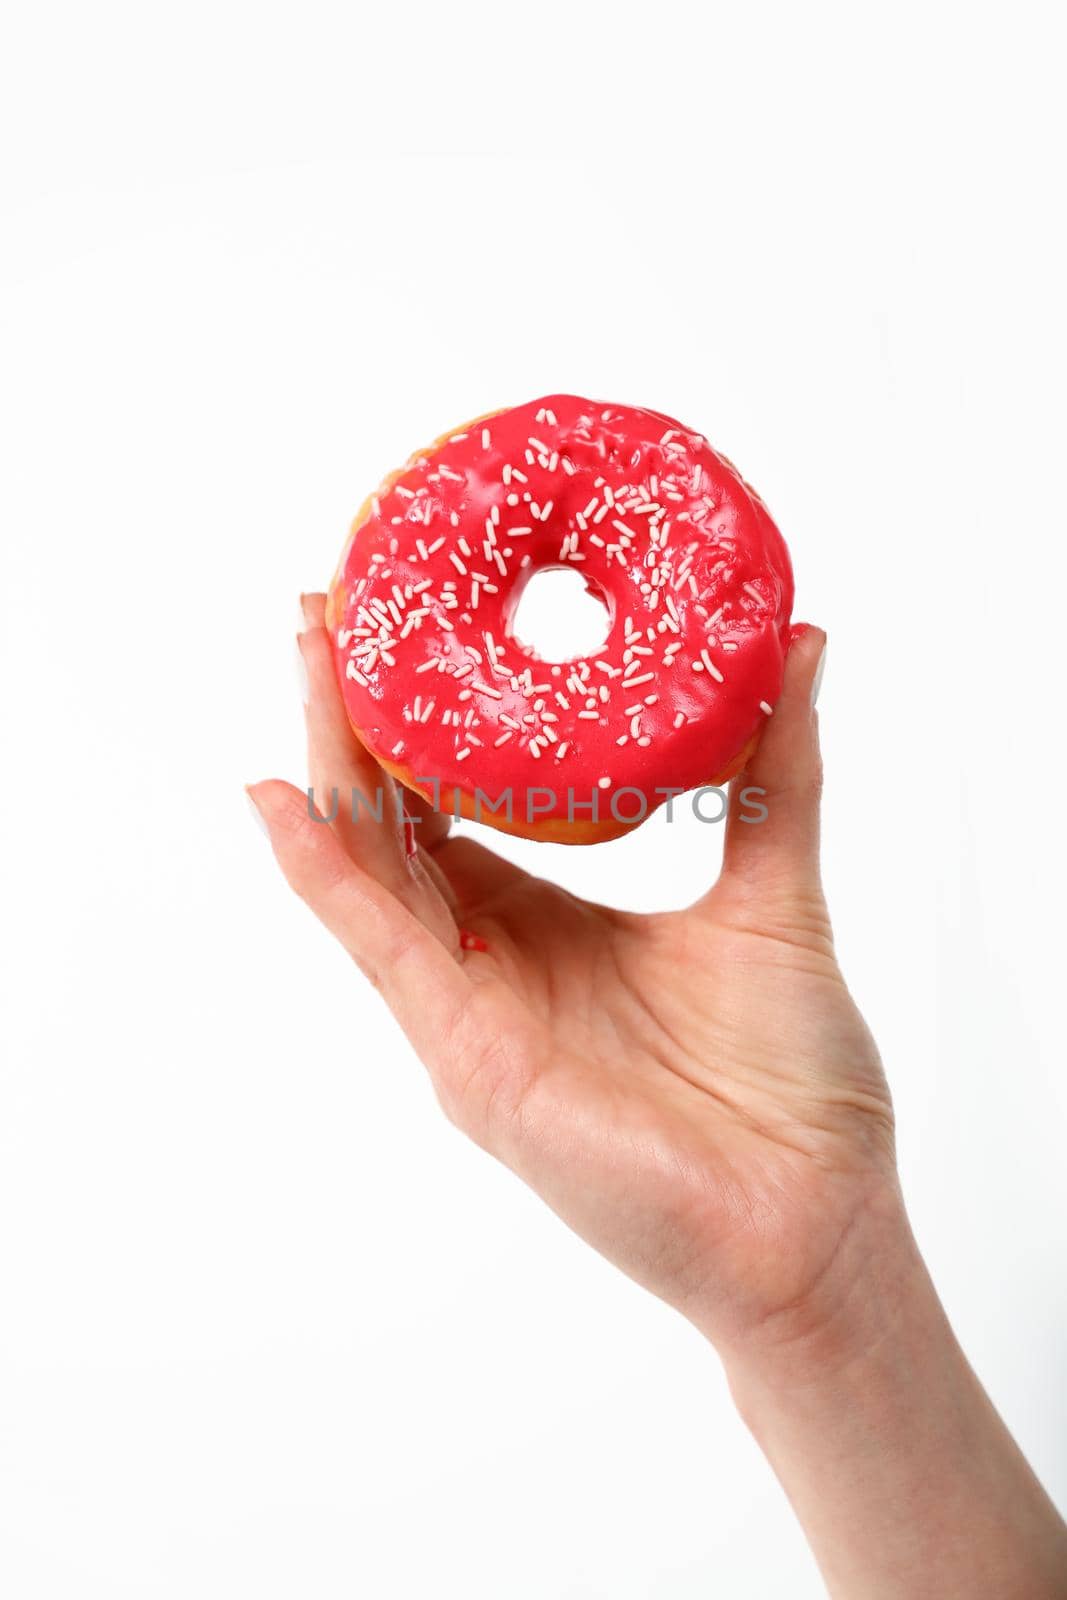 Close up Caucasian woman hand holding one red icing glazed ring doughnut isolated on white background, symbol of unhealthy eating concept, low angle, side view